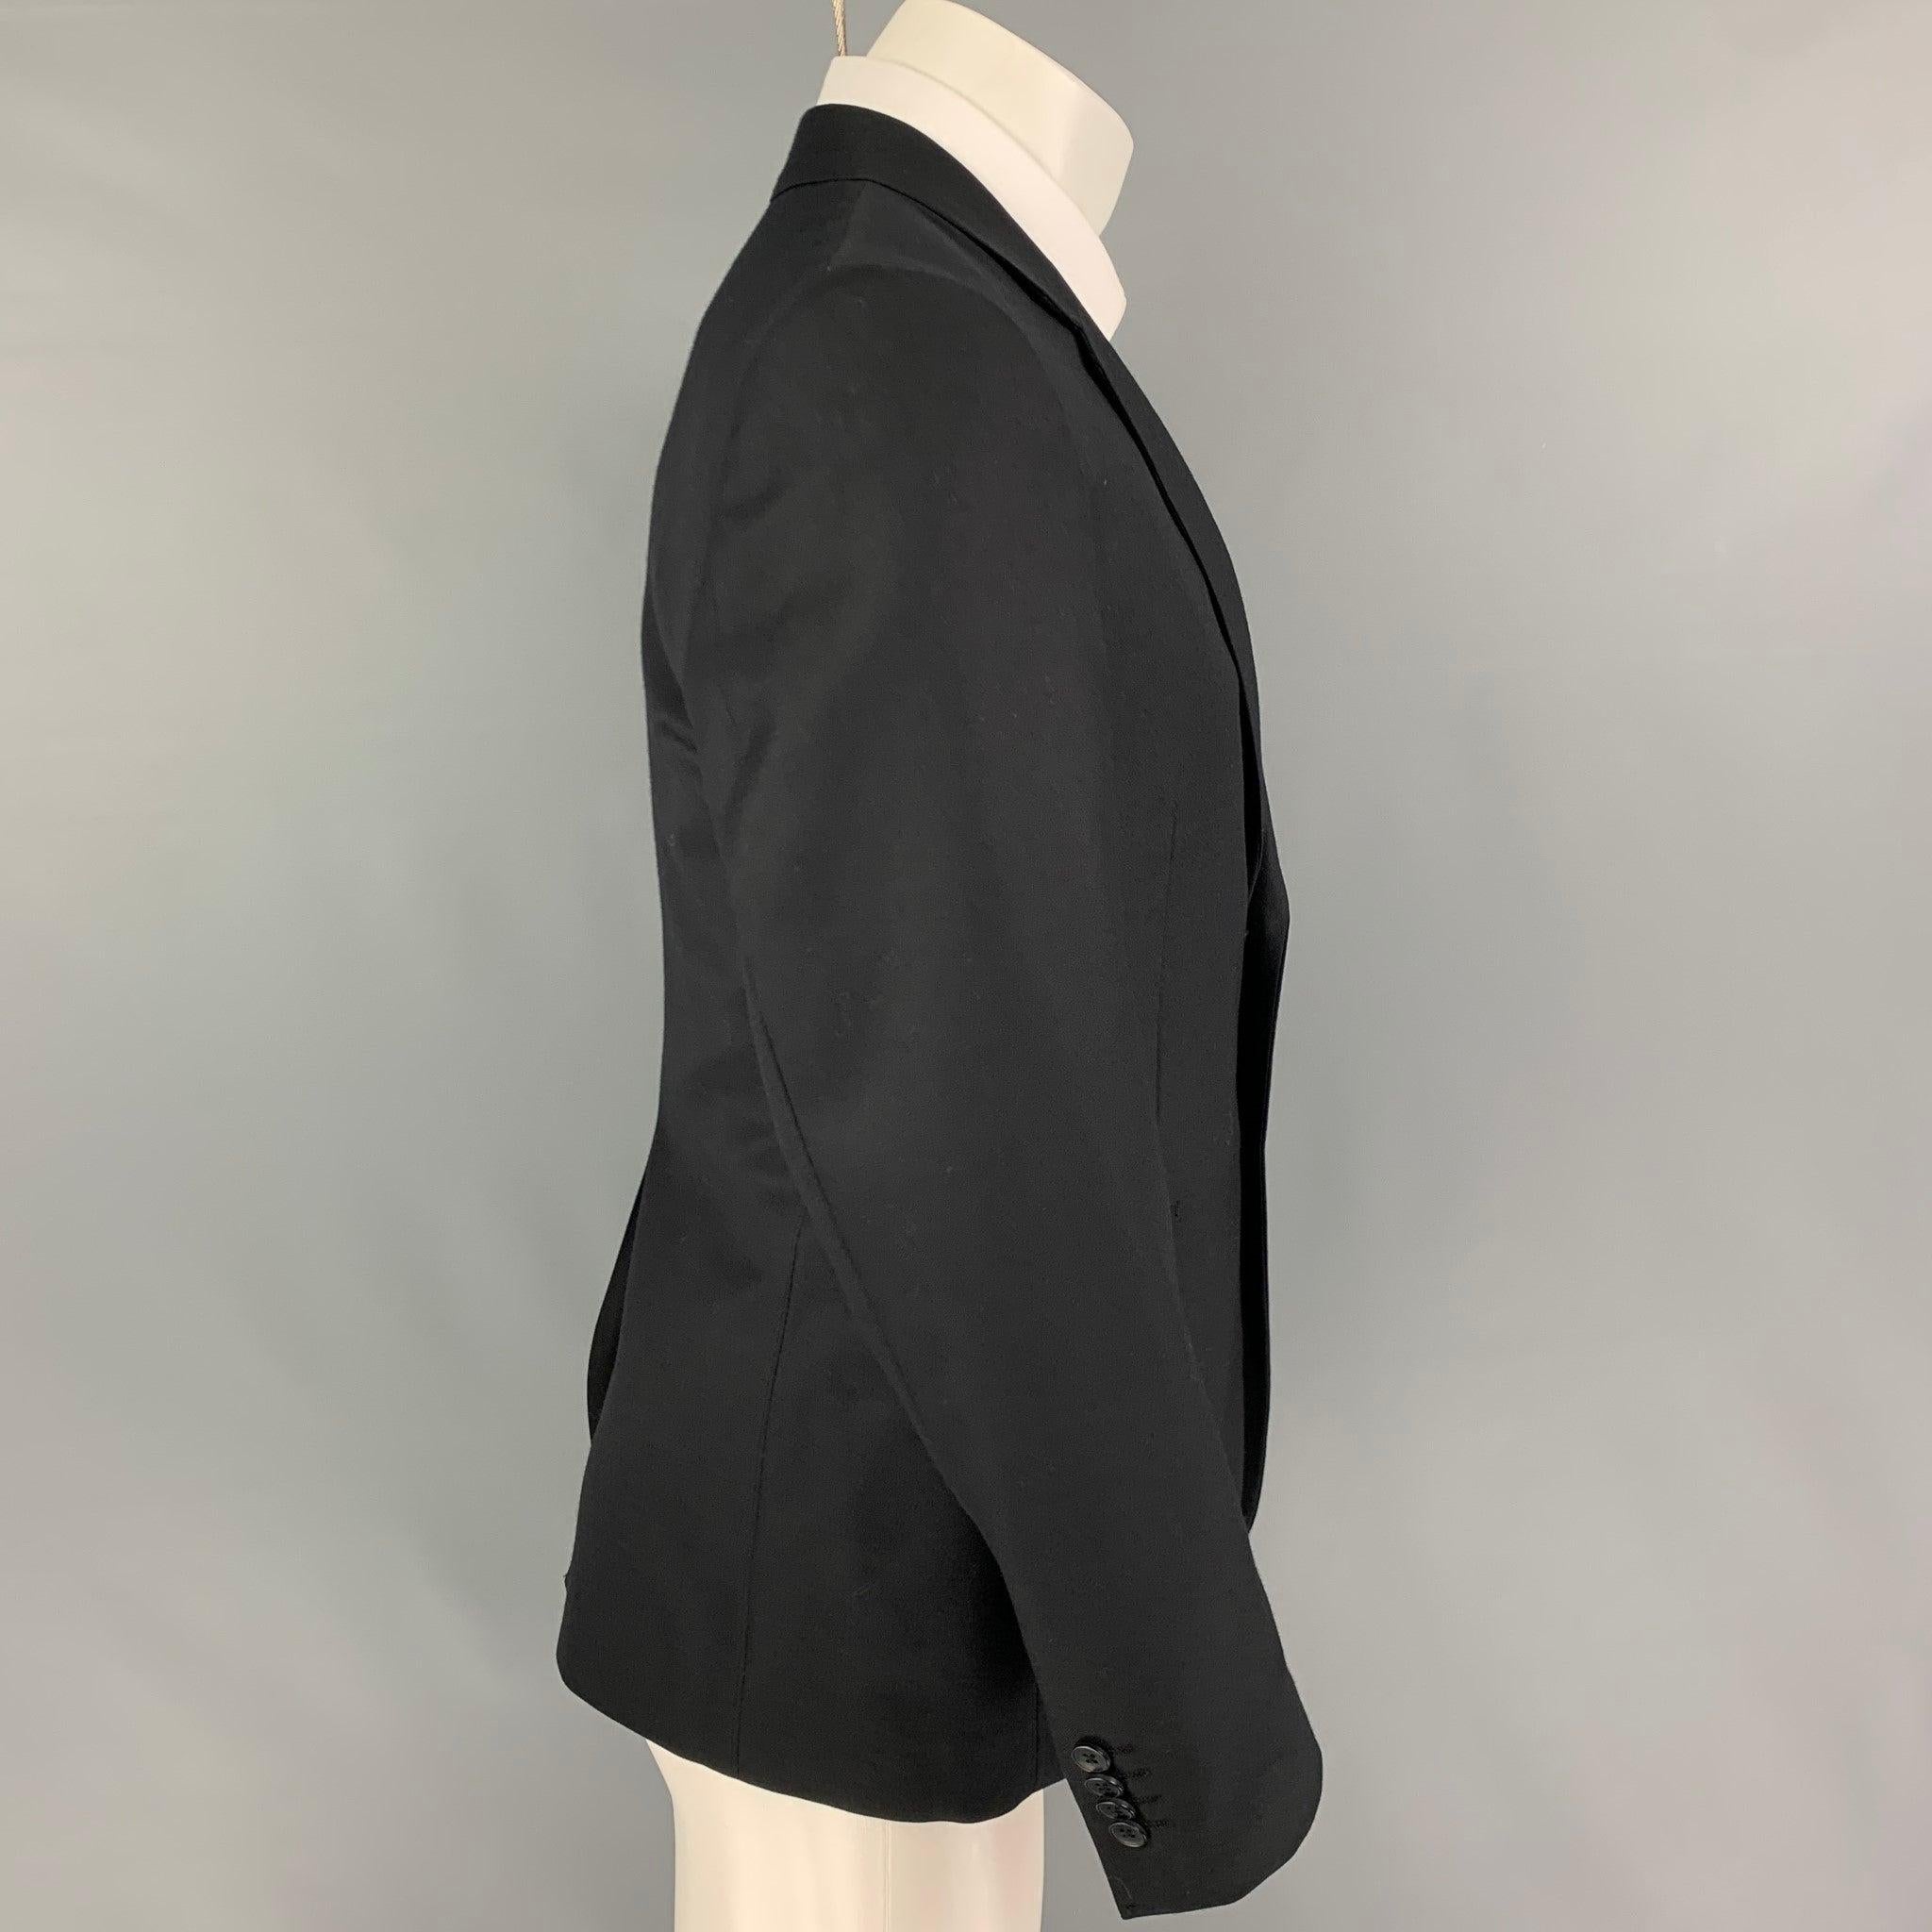 THEORY
sport coat comes in a black wool with a full liner featuring a notch lapel, flap pockets, single back vent, and a double button closure.Very Good Pre-Owned Condition.  

Marked:   38 

Measurements: 
 
Shoulder: 17 inches  Chest: 38 inches 